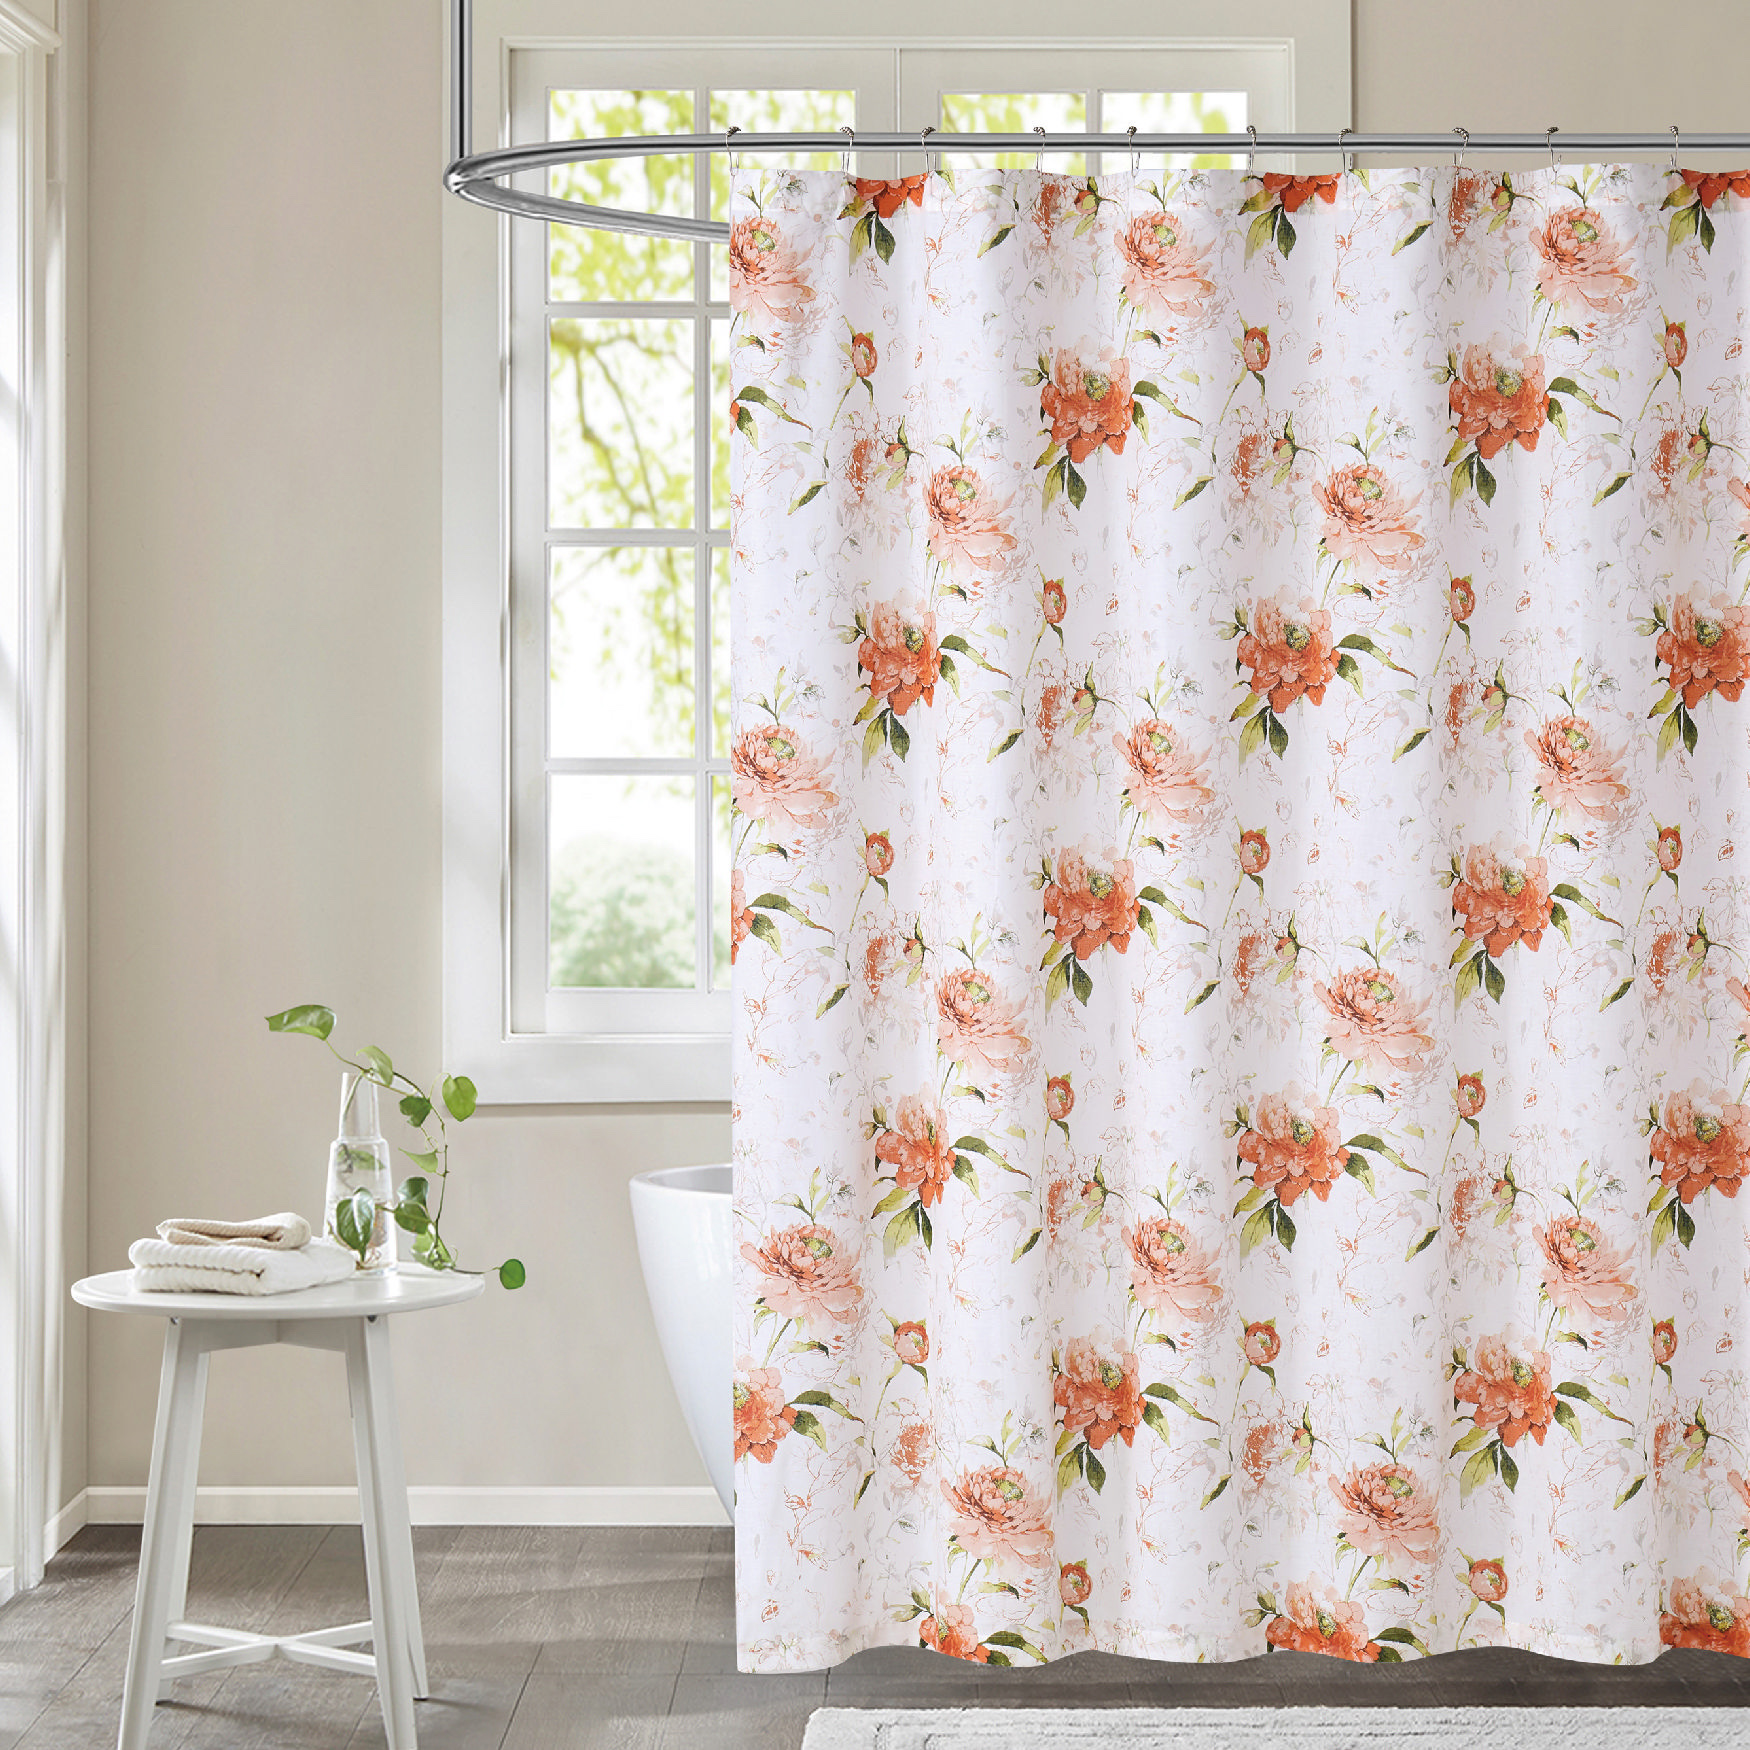 Cottage Classics Veronica Shower Curtain | Brylane Home